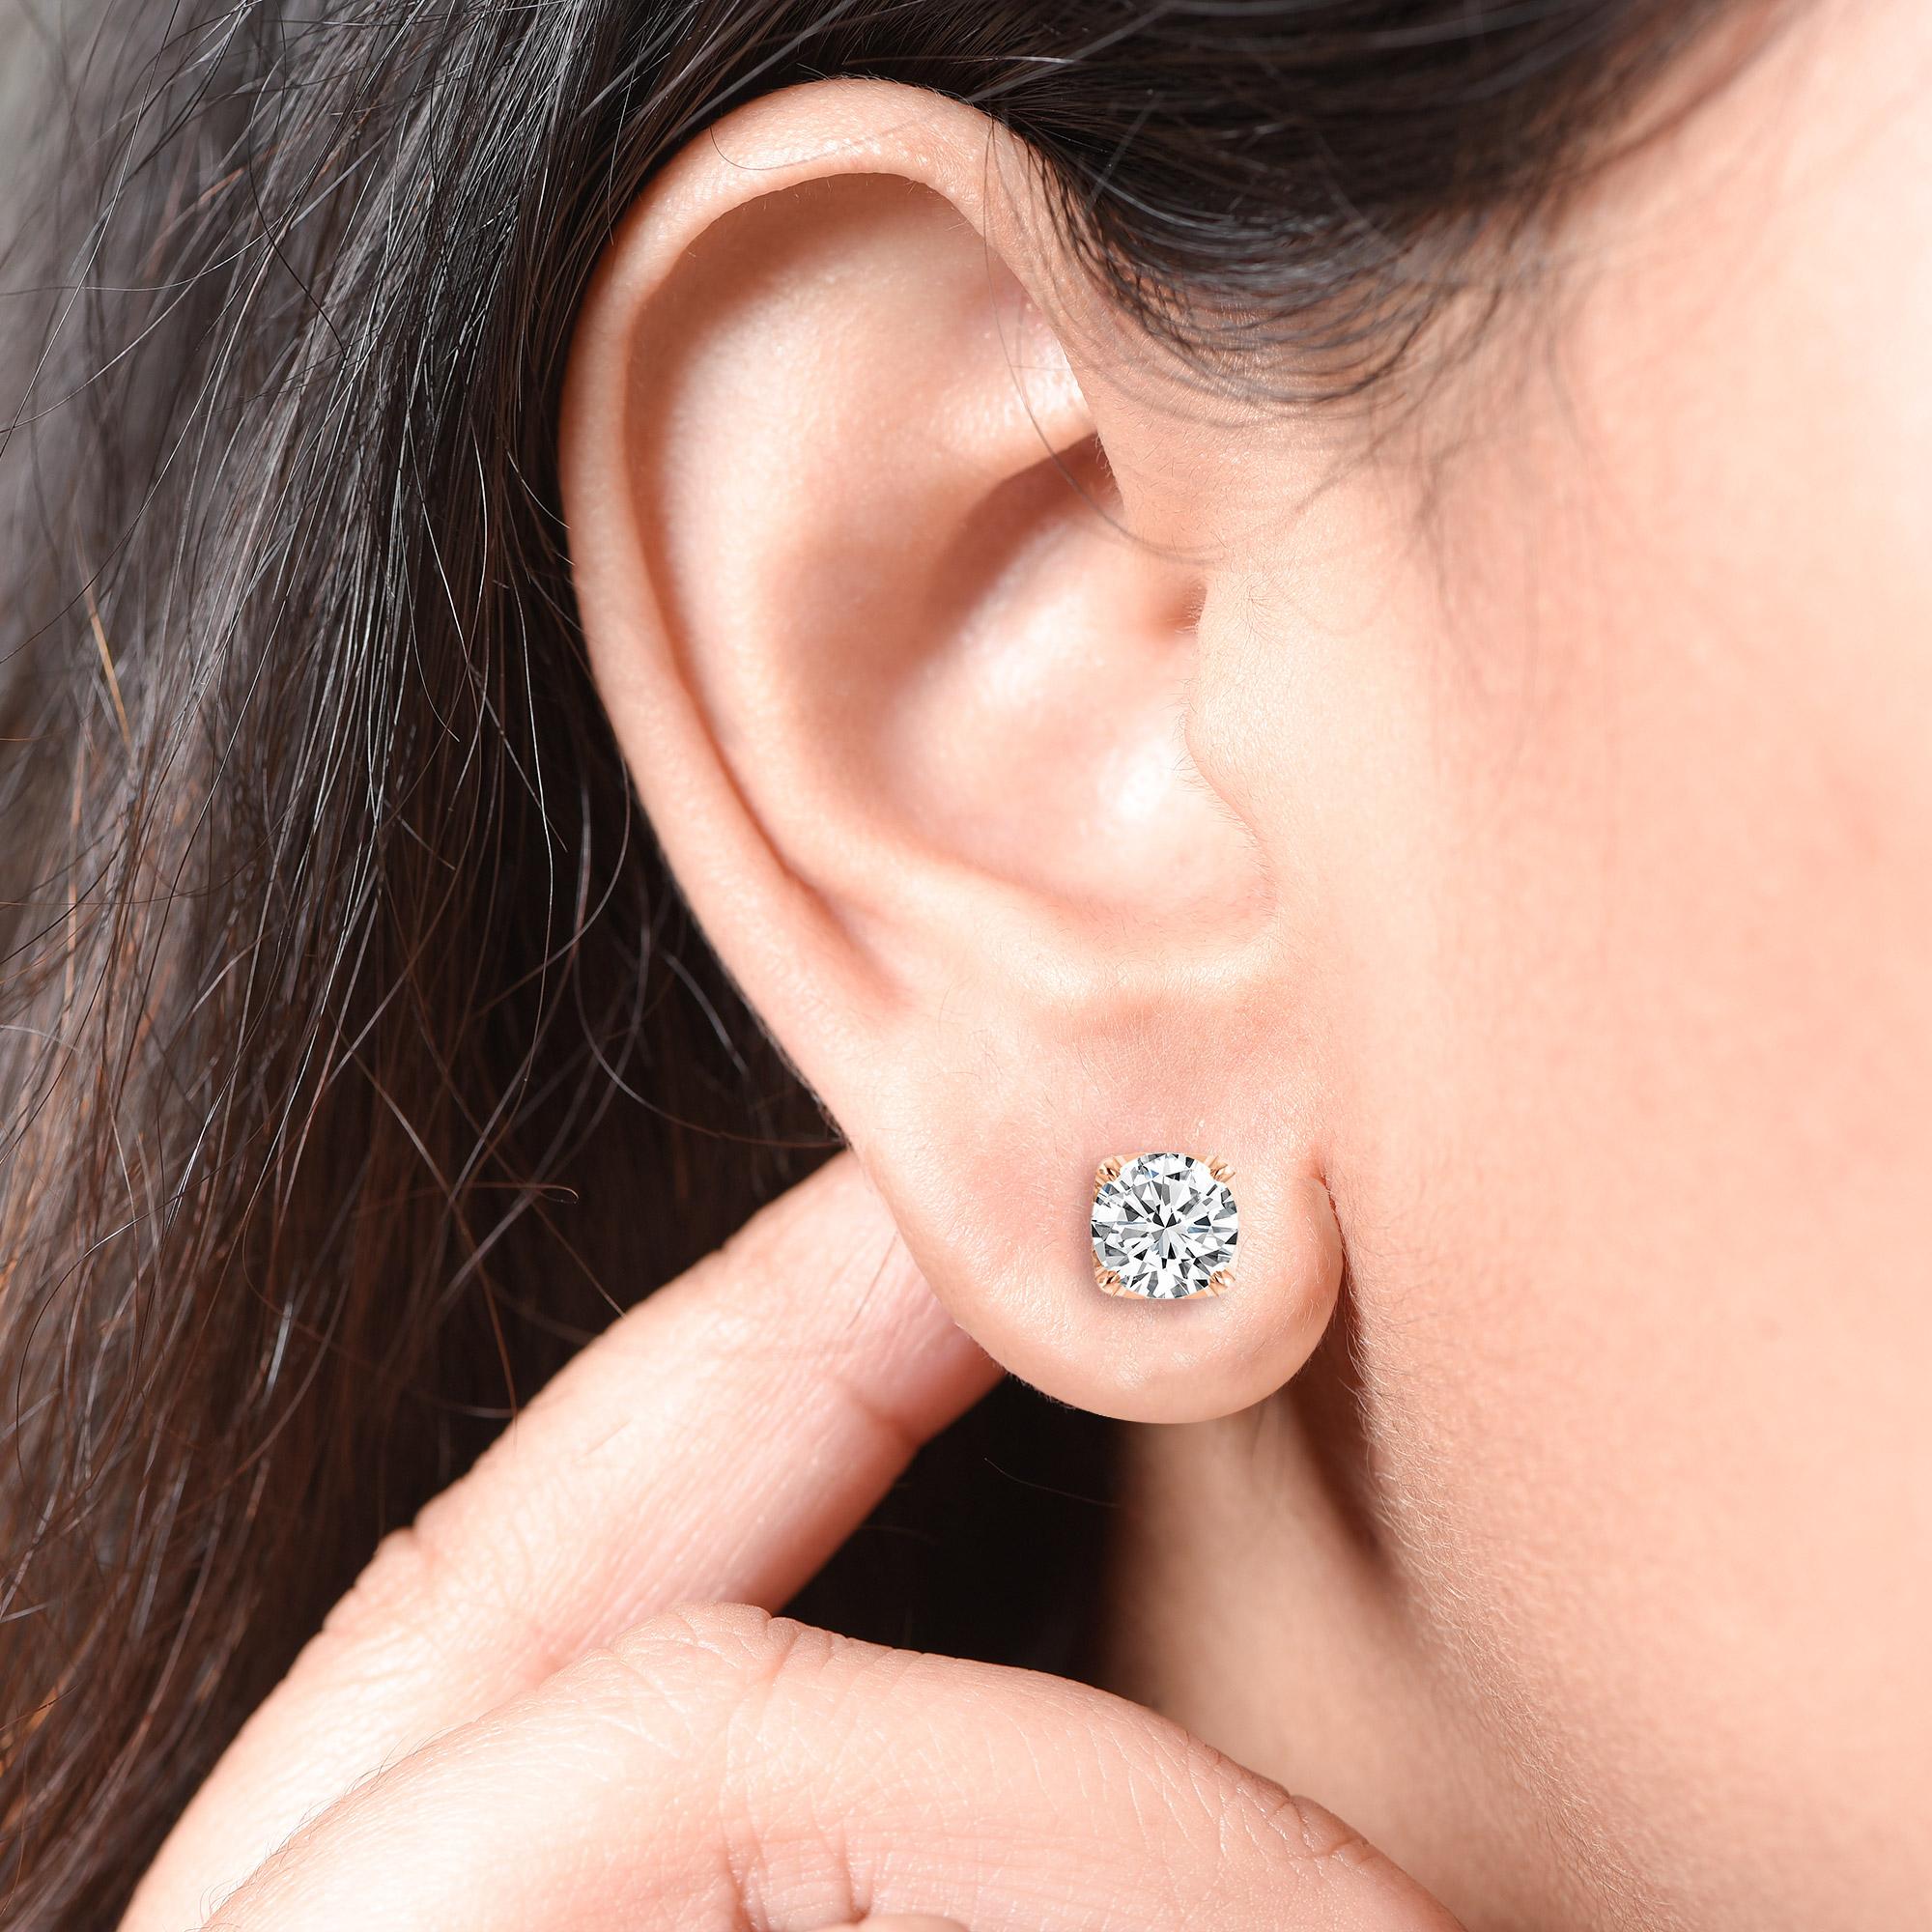 These GIA certified classic diamond studs showcase a pair of perfectly matched diamonds weighing total 1.25 carat. Crafted in 18-karat rose gold, these four prong earrings are available in yellow and white gold as well.

Perfect for gifting and for